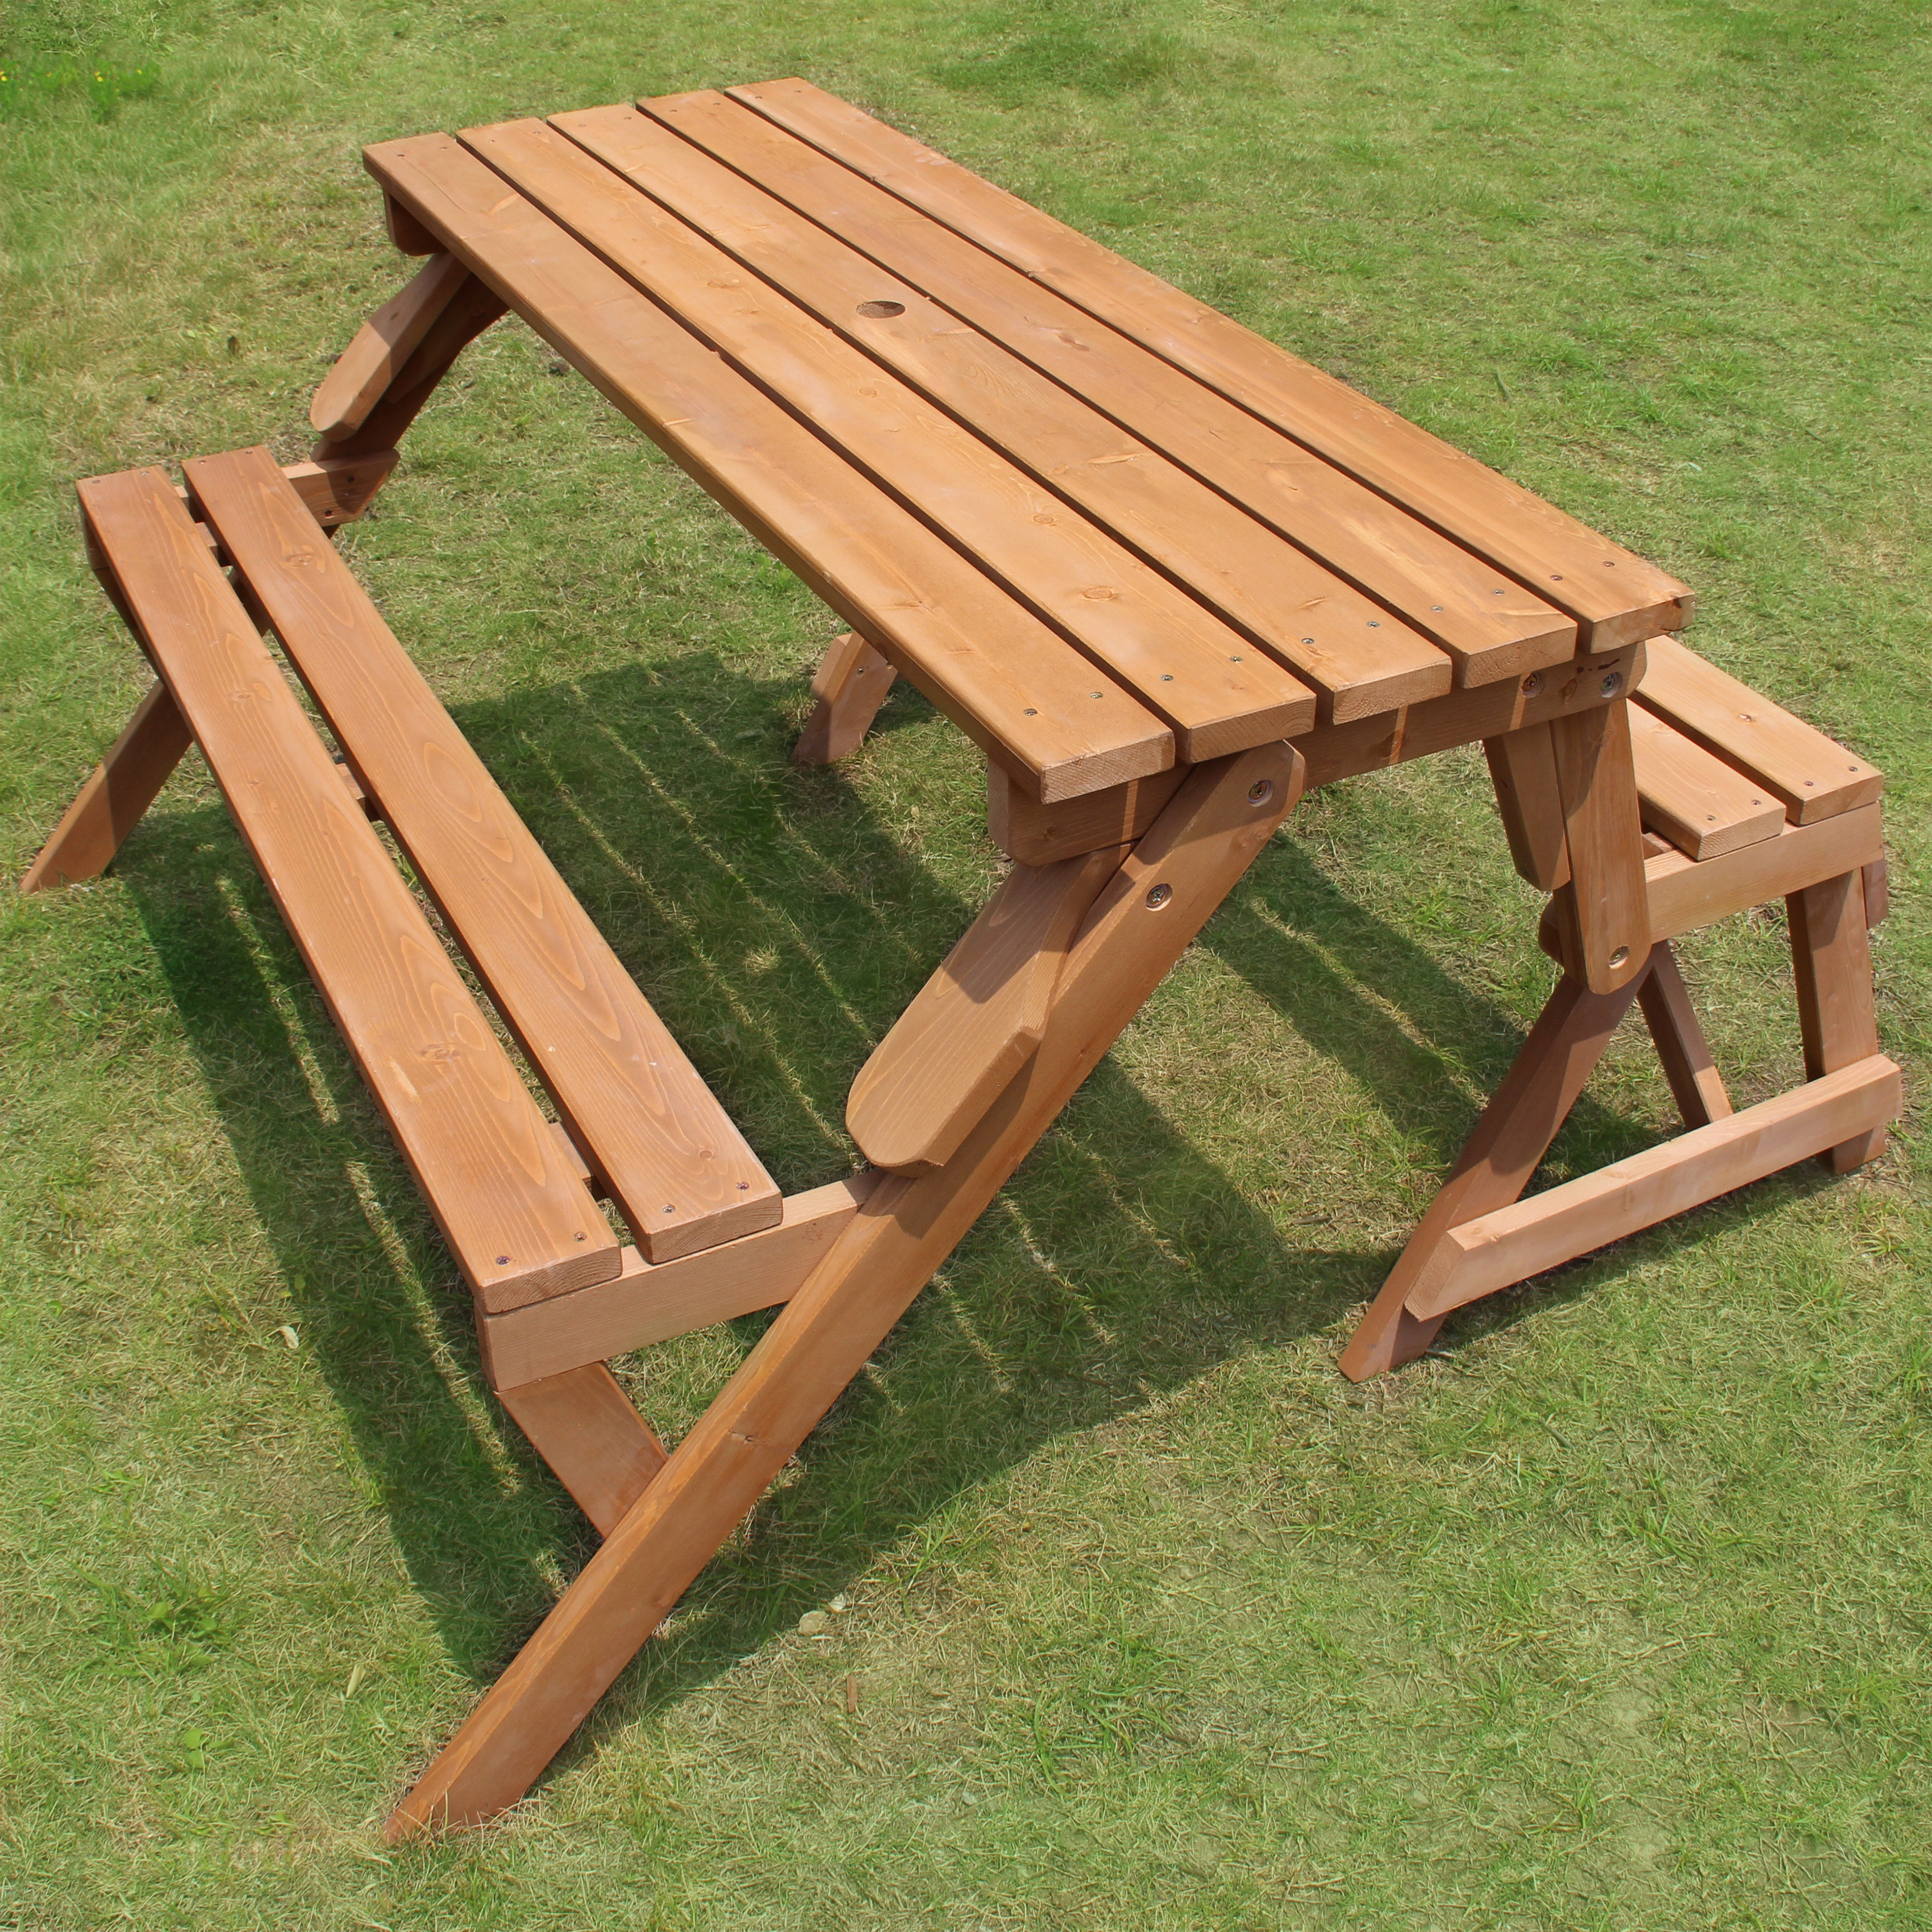 Wood Picnic Table - Garden Bench- Wood